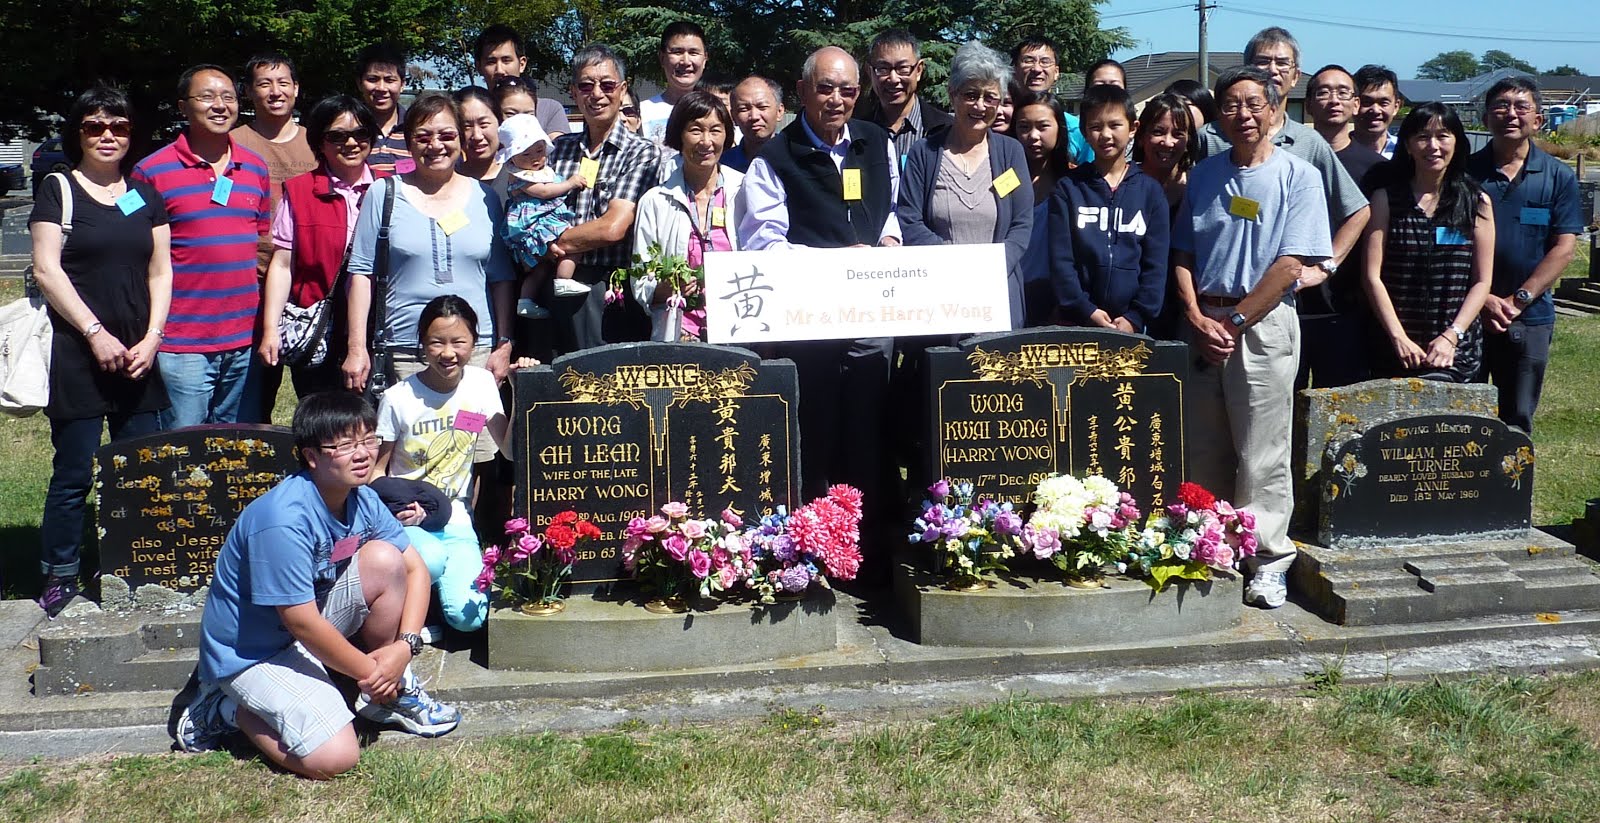 Harry Wong Family at the Cemetery